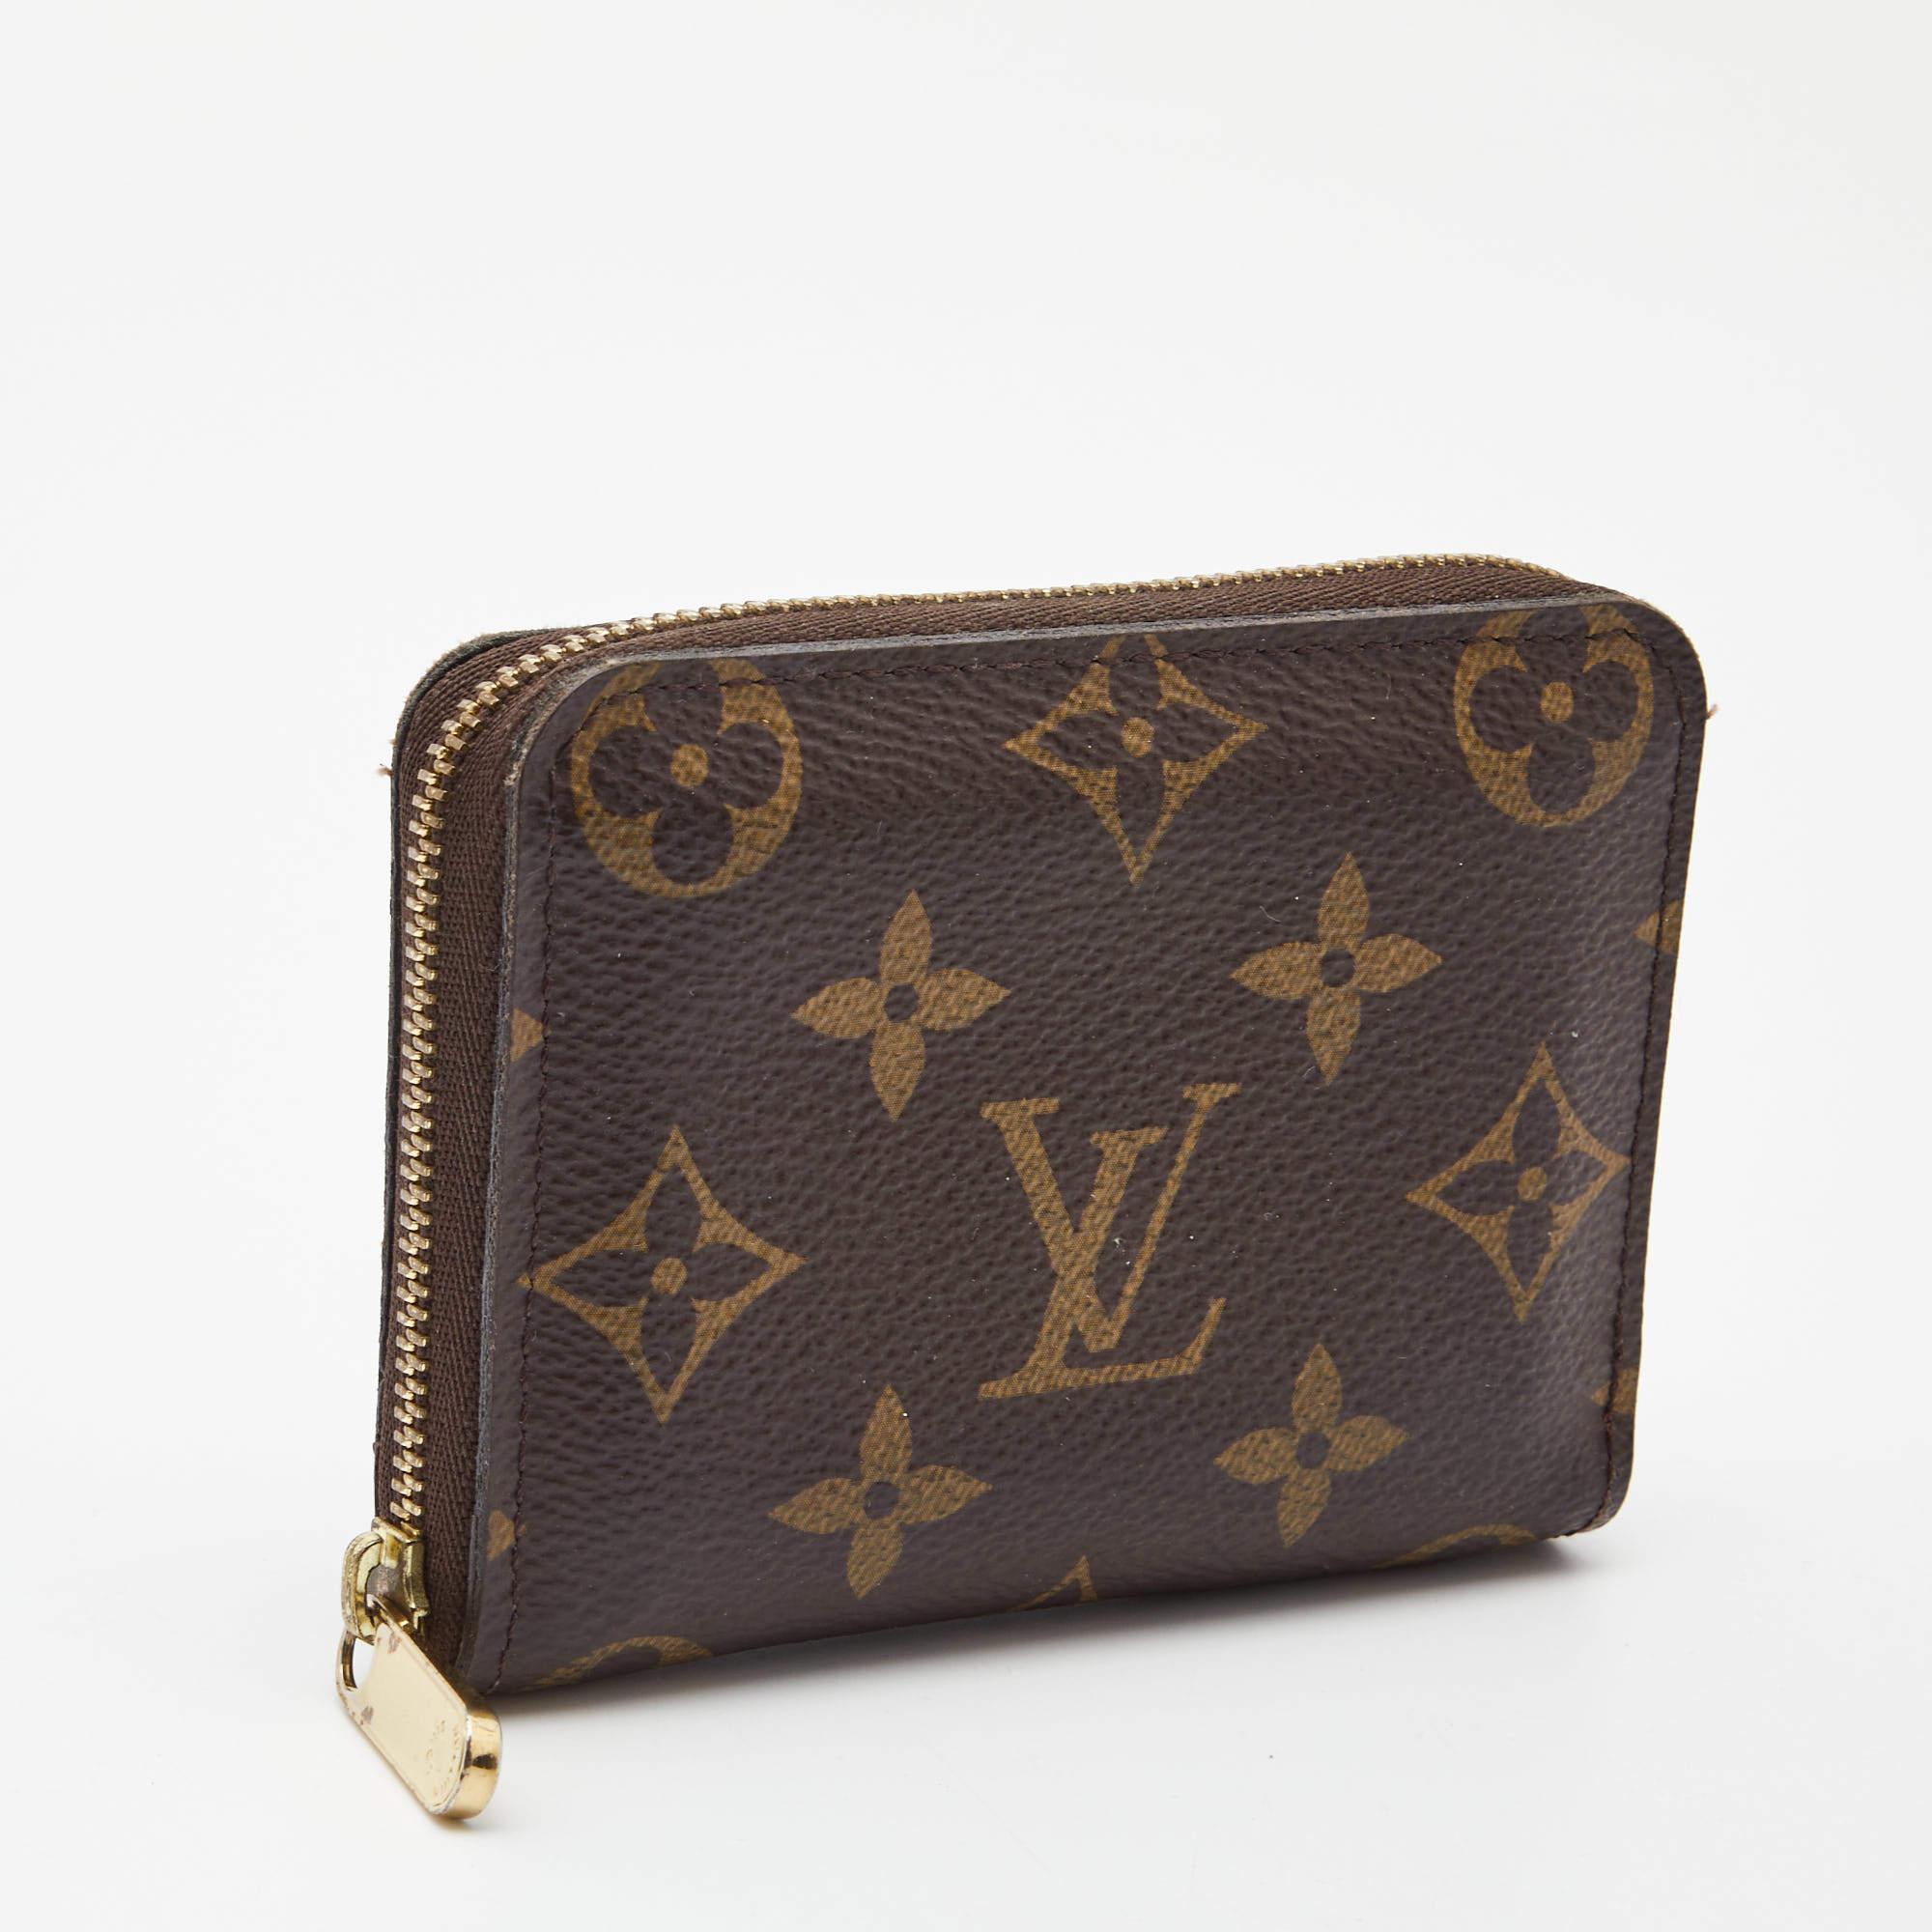 This Louis Vuitton Zippy coin purse is conveniently designed for everyday use. Crafted from Monogram canvas, the wallet has a zip closure that opens to reveal multiple slots for you to neatly arrange your cards and coins.

